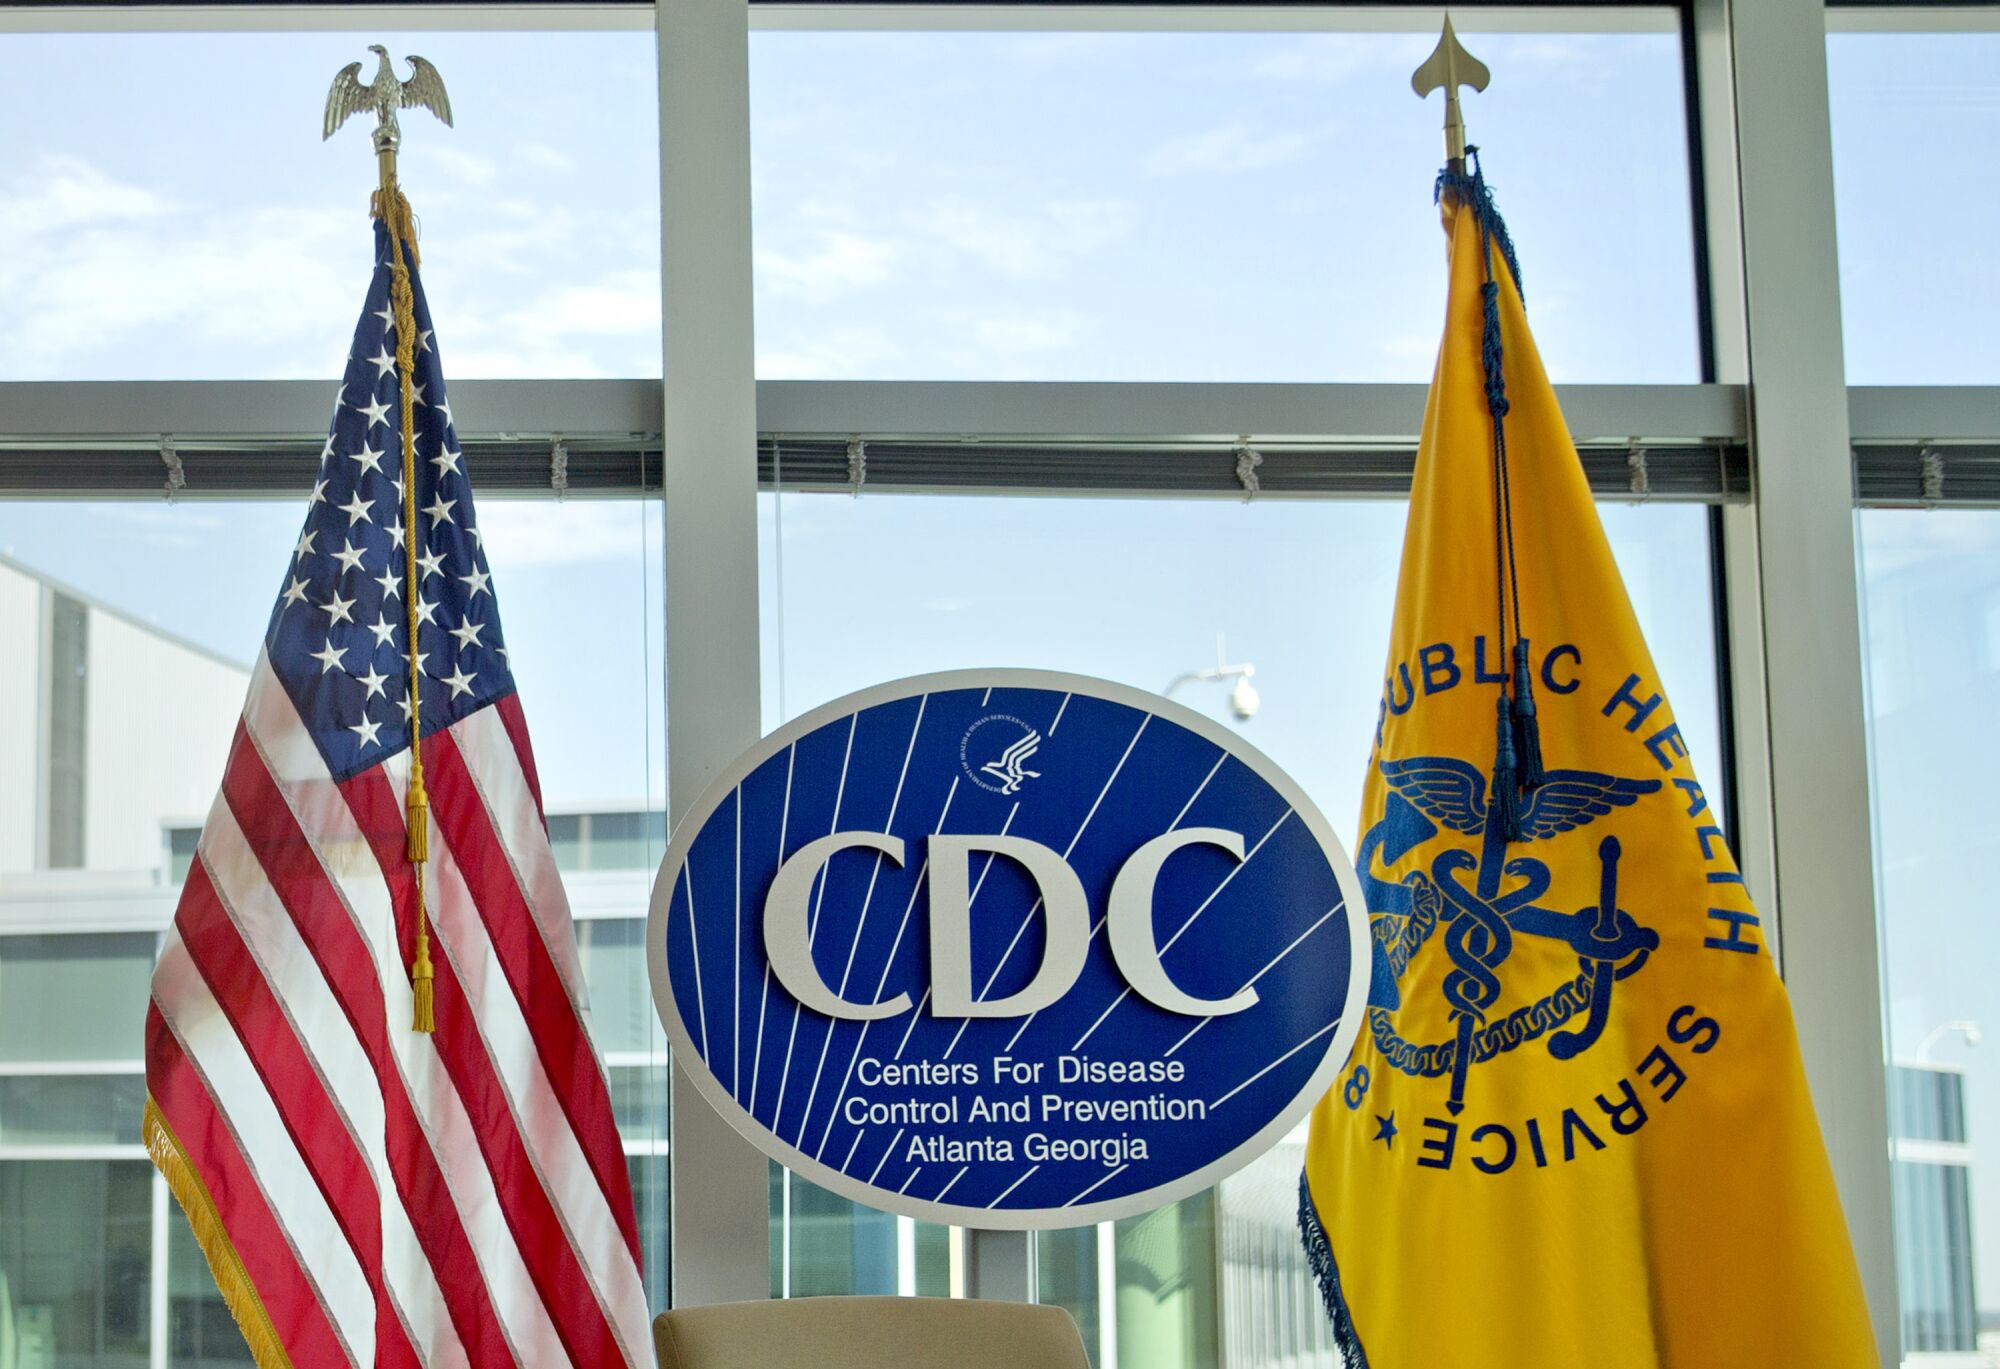 The U.S. flag, left, and a yellow flag depicting a blue caduceus flank a blue oval-shaped CDC logo 